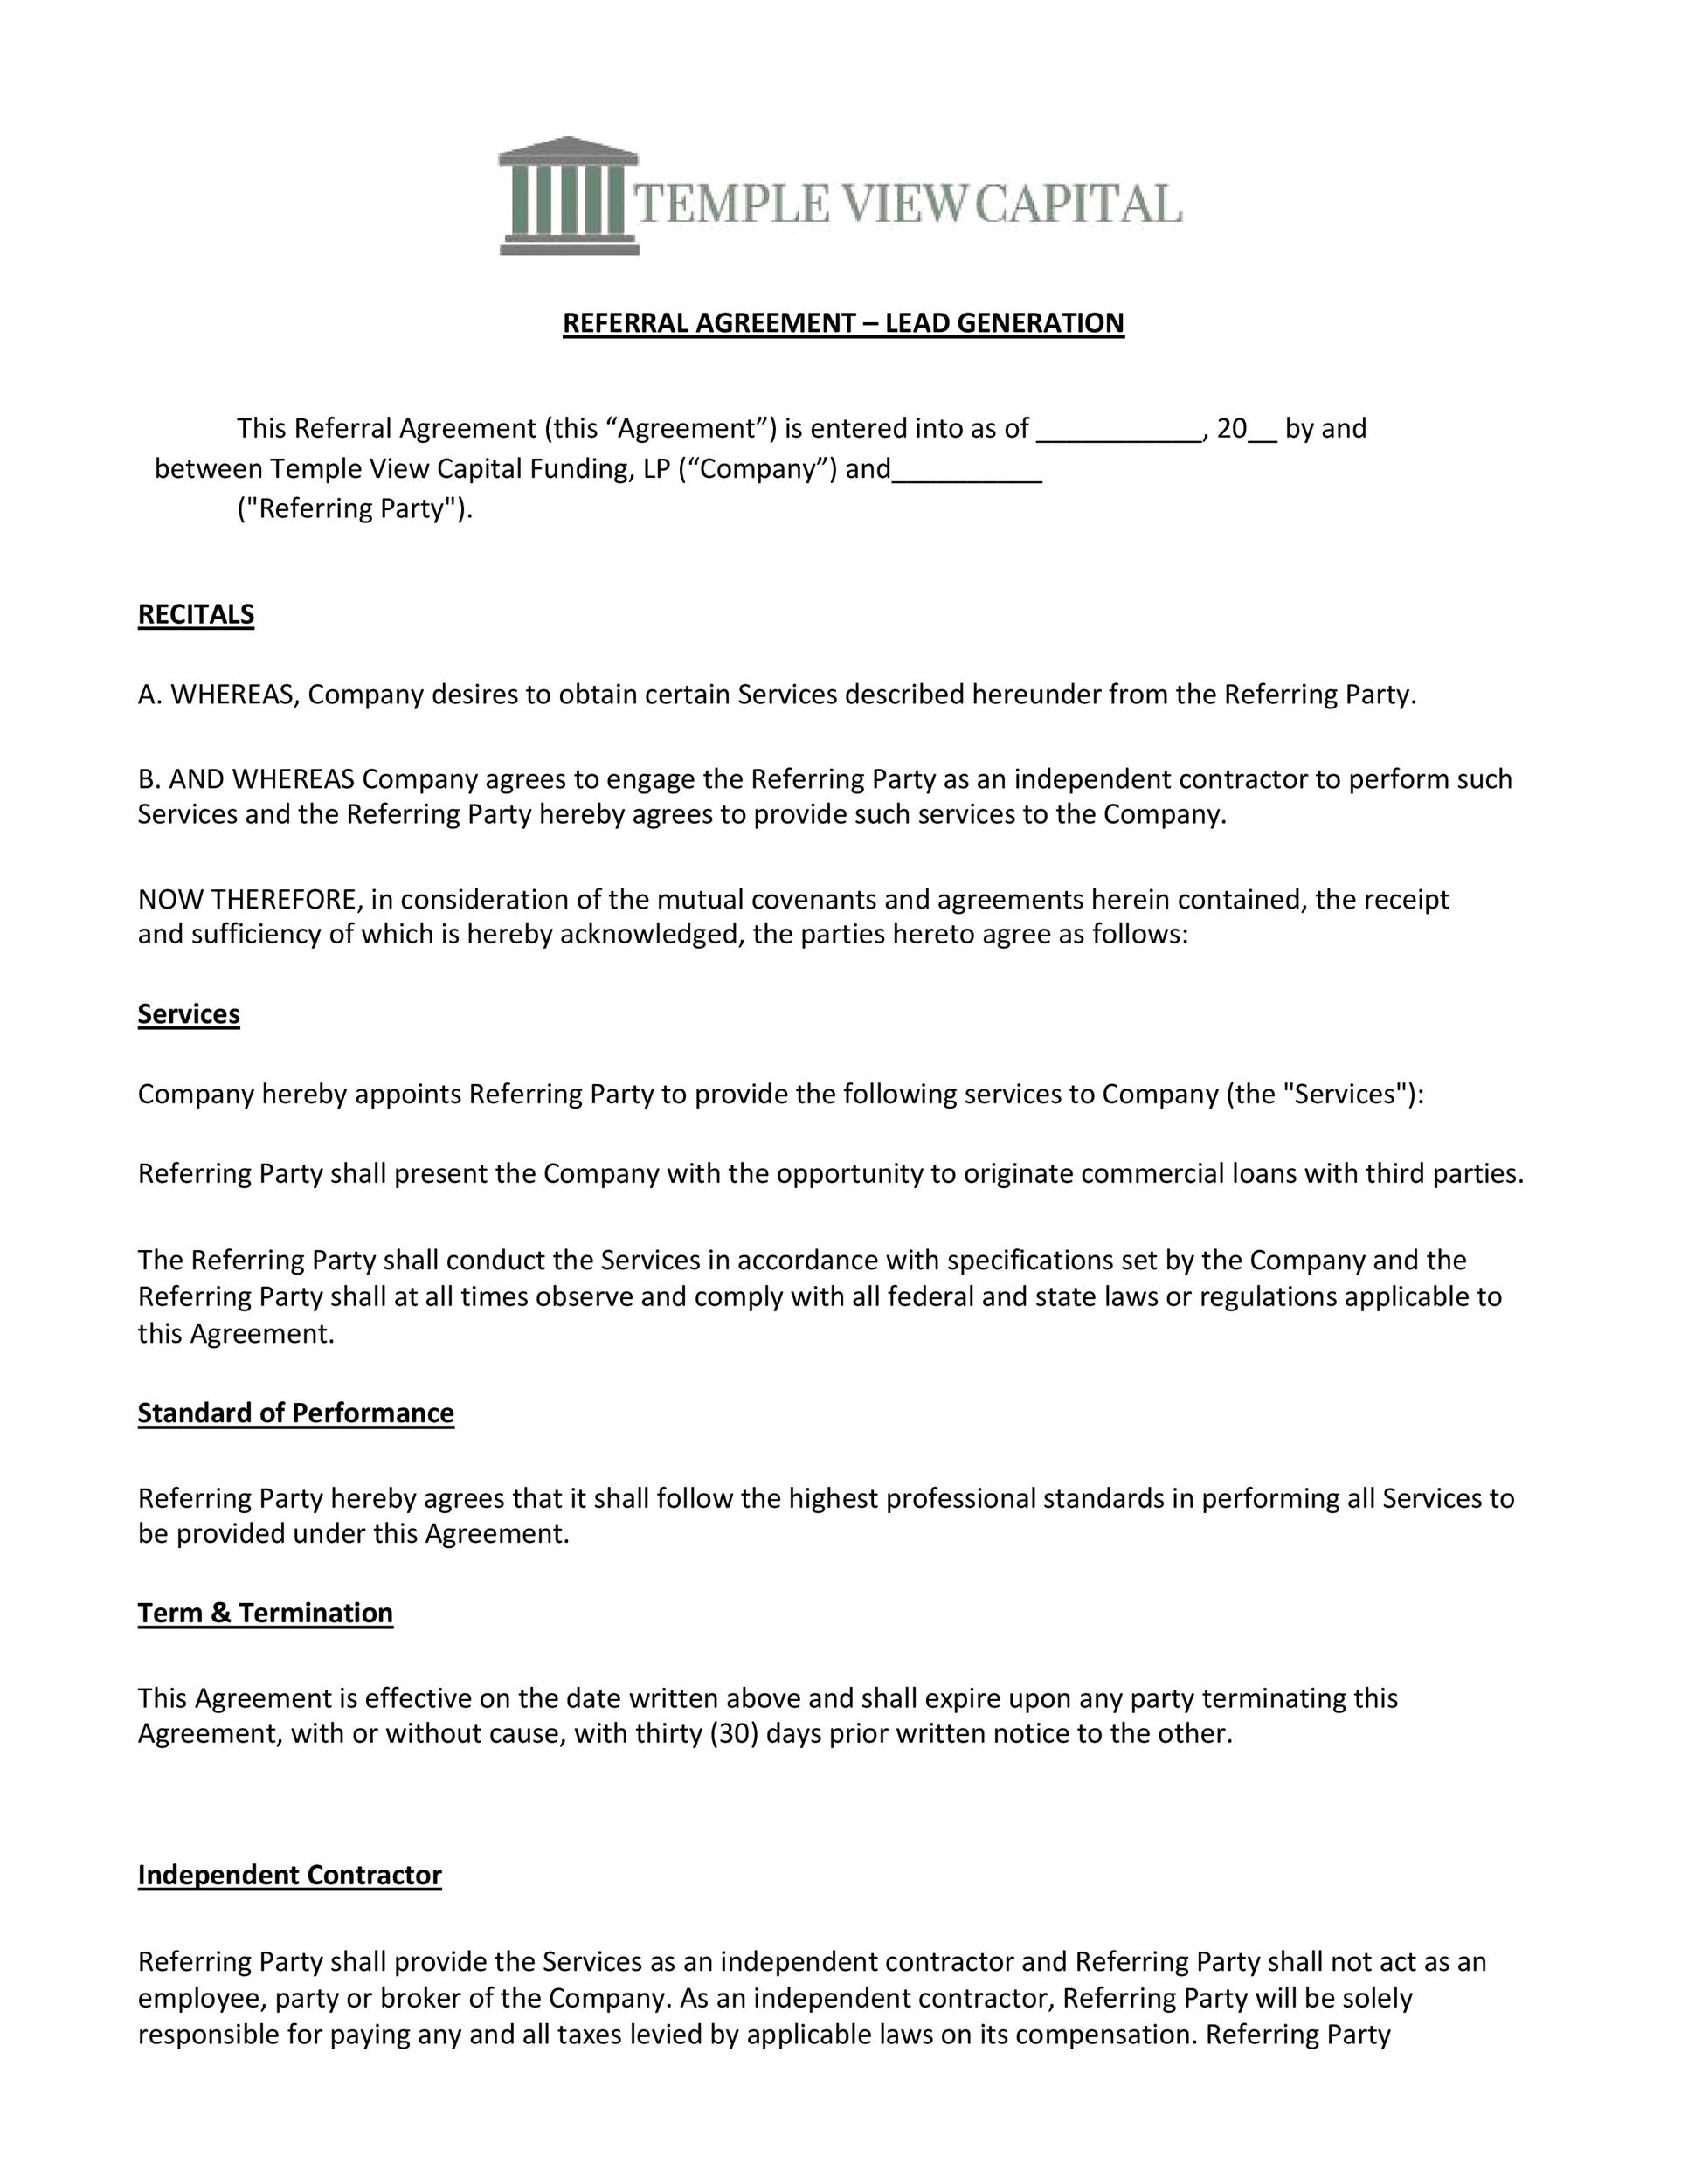 Free referral agreement template 40